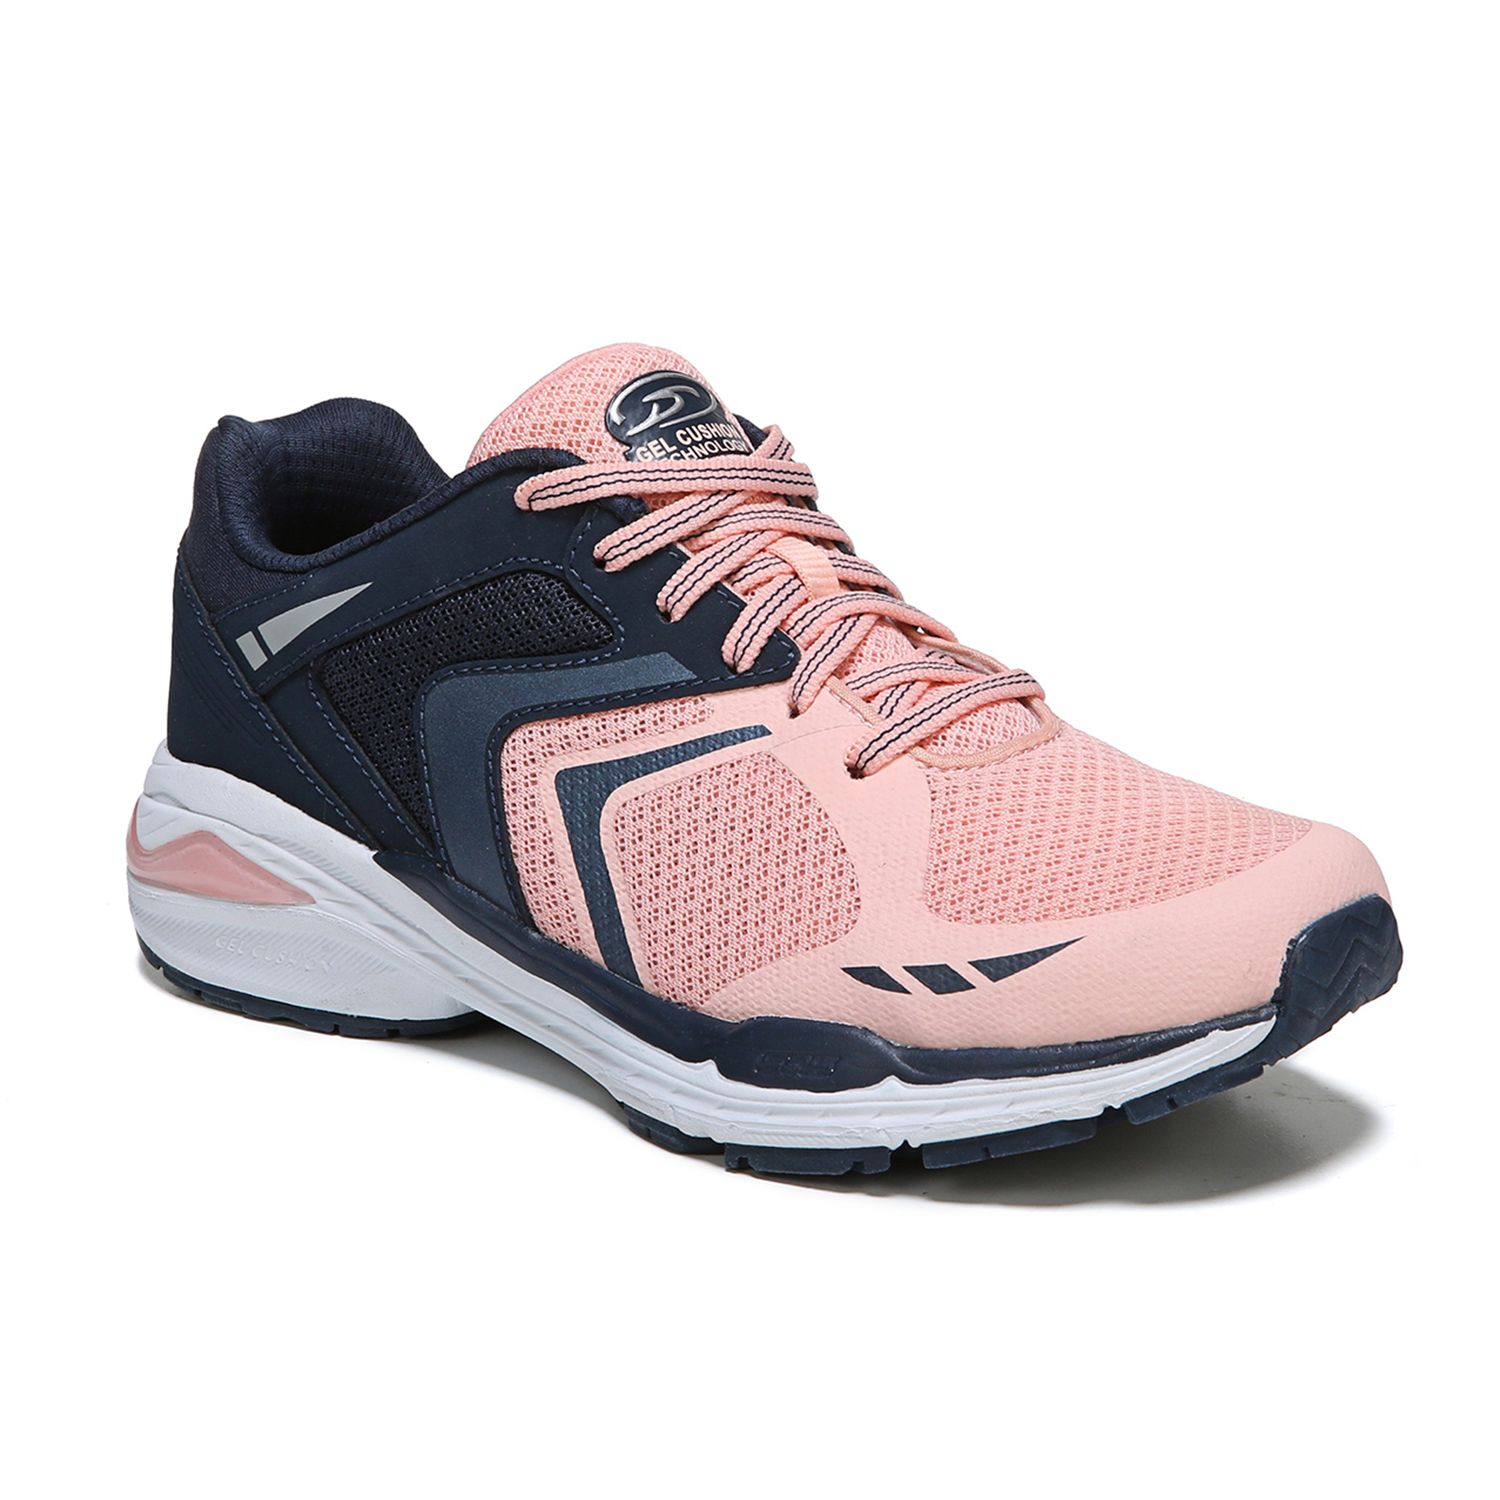 Image for Dr. Scholl's Blitz Women's Sneakers at Kohl's.